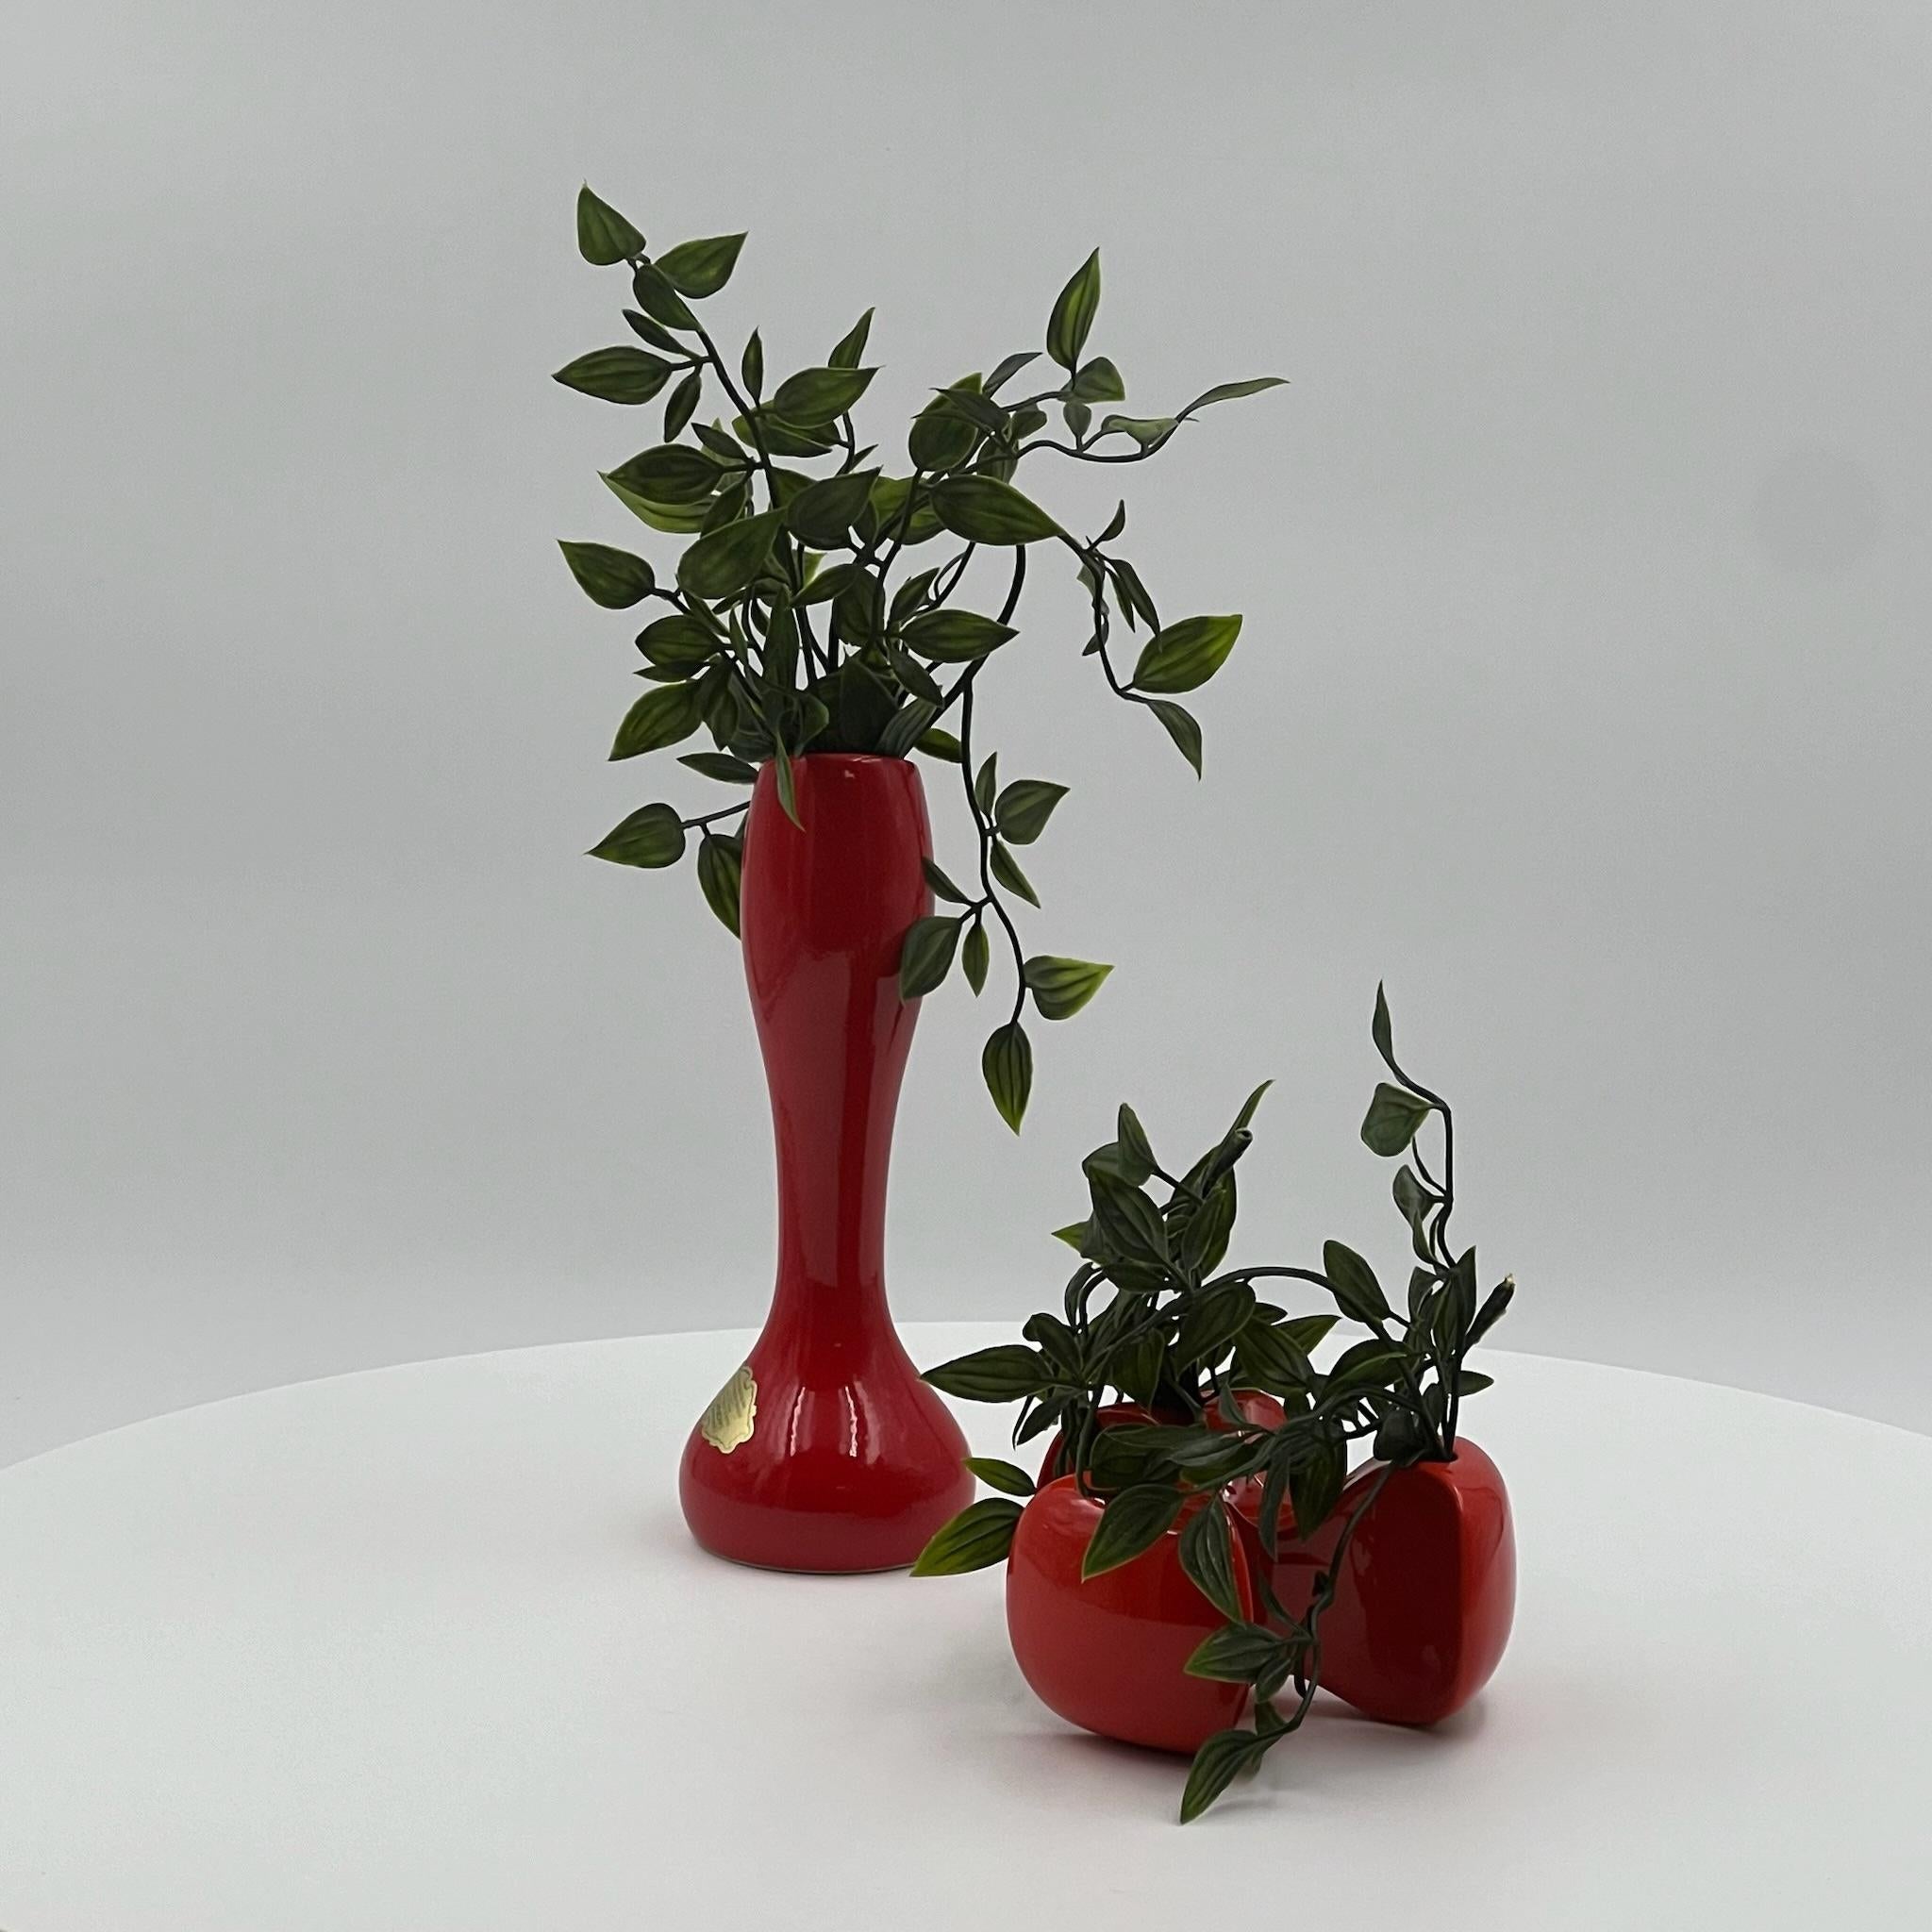 Spruce up your decor with this stunning vintage 70s ceramic vase duo crafted in Italy. The taller vase, a Monica art ceramic, boasts a vibrant handcrafted design glazed in bold red, standing at 20 cm tall with a diameter of 7 cm.

Complementing its